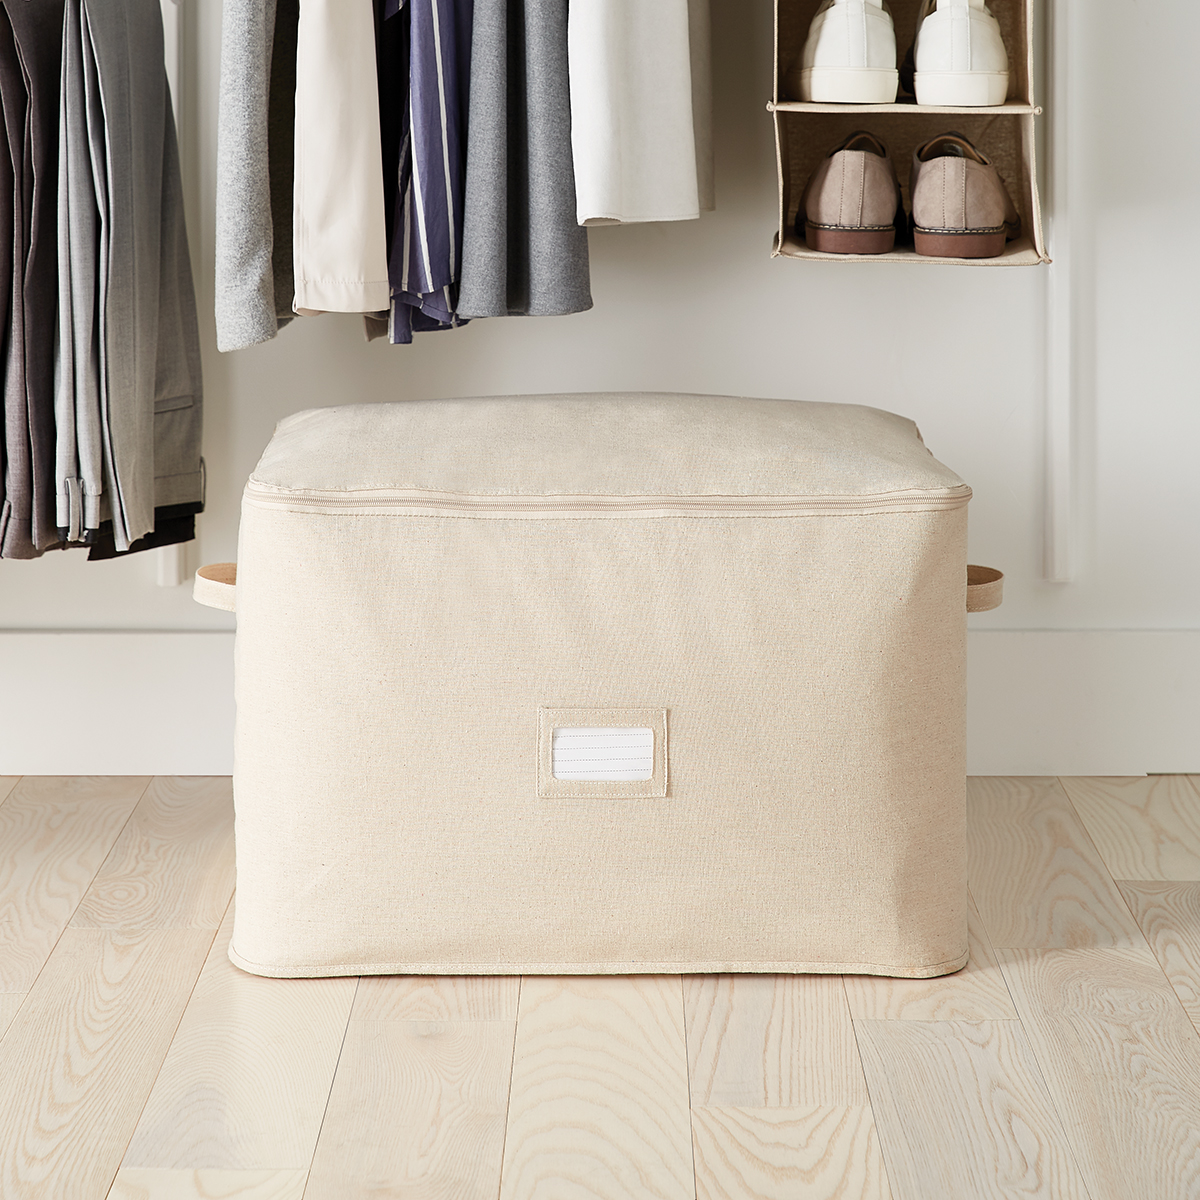 https://www.containerstore.com/catalogimages/462916/10079281-large-storage-bag-natural-.jpeg